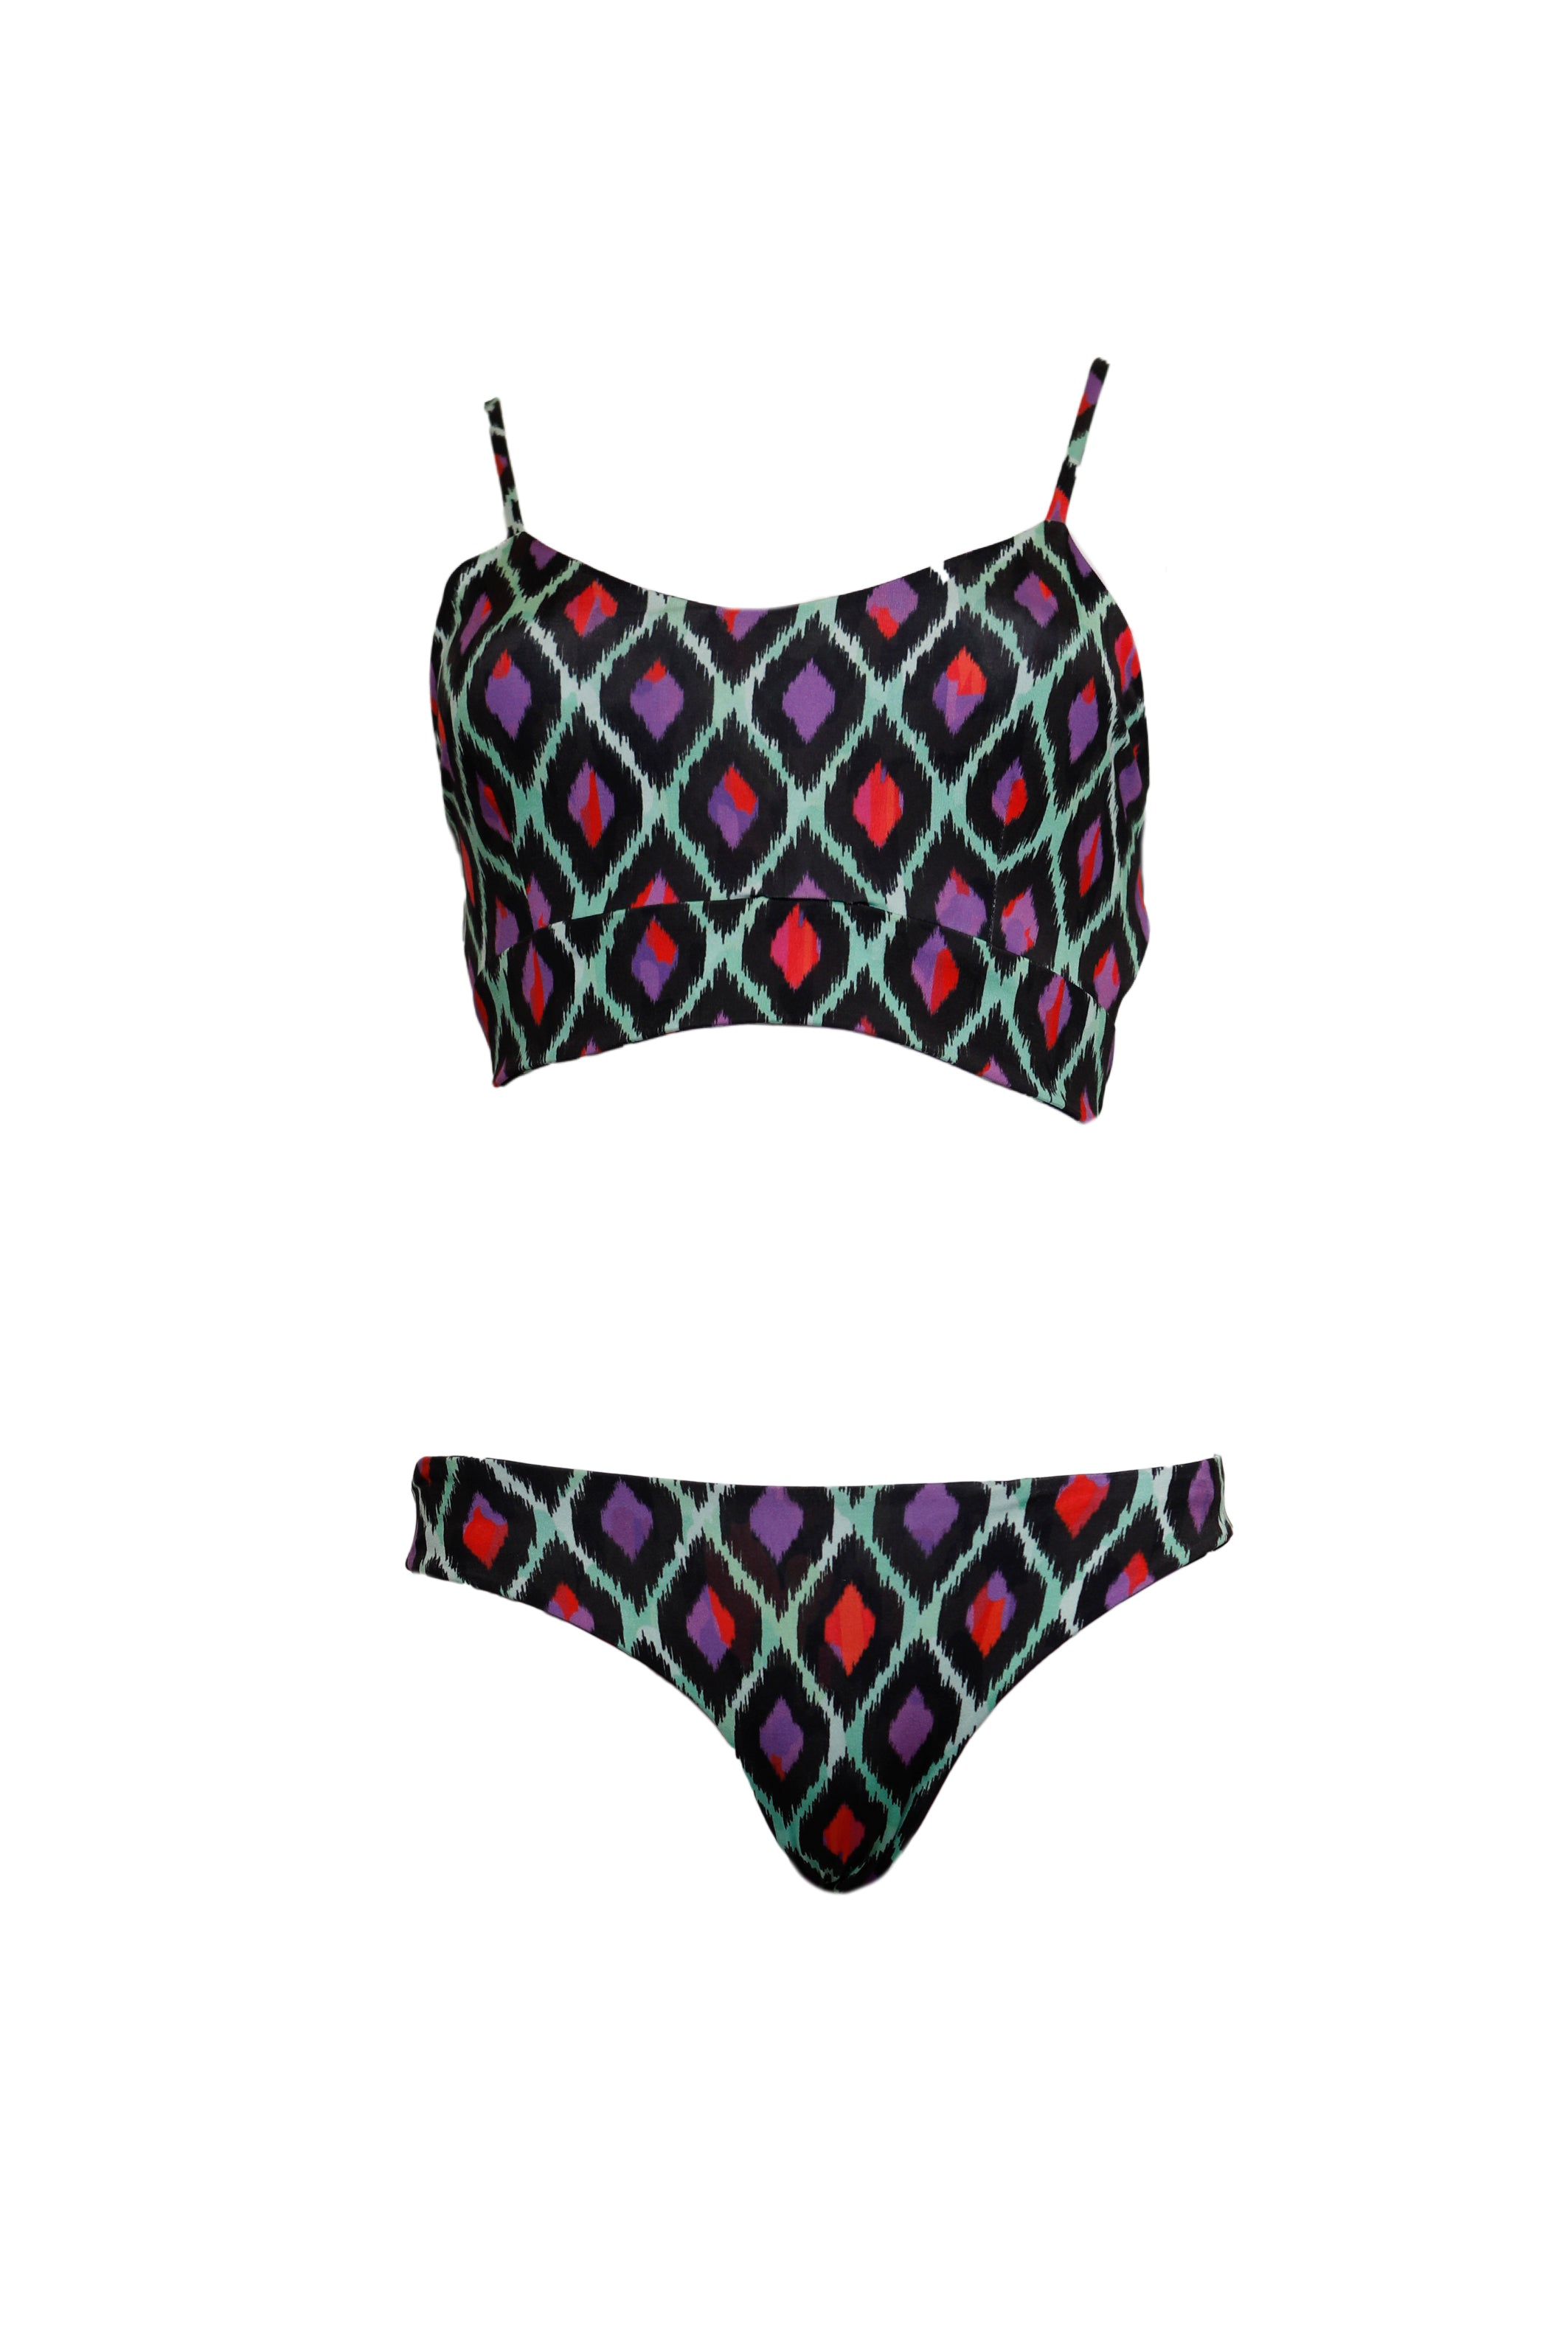 CECILIA - two-piece swimsuit in Rombi print lycra